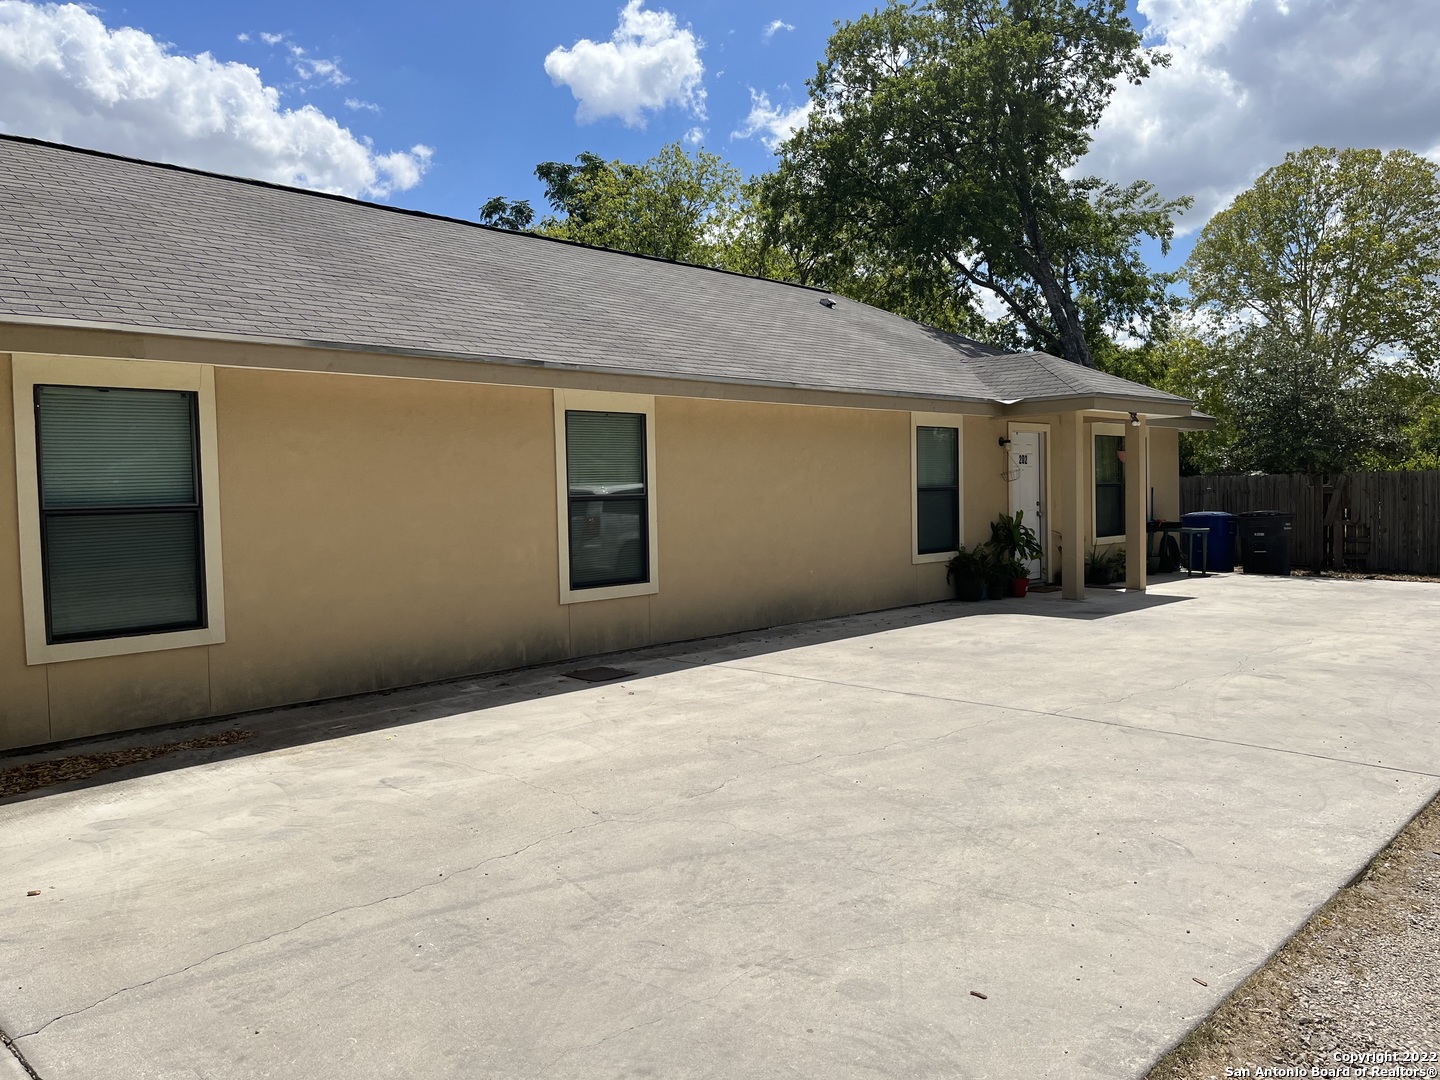 Investment property.  Total of four units.  All units occupied with lease dates running through June 30, 2023.  Do not disturb tenants.  Showings will be allowed once an offer has been accepted by the seller.